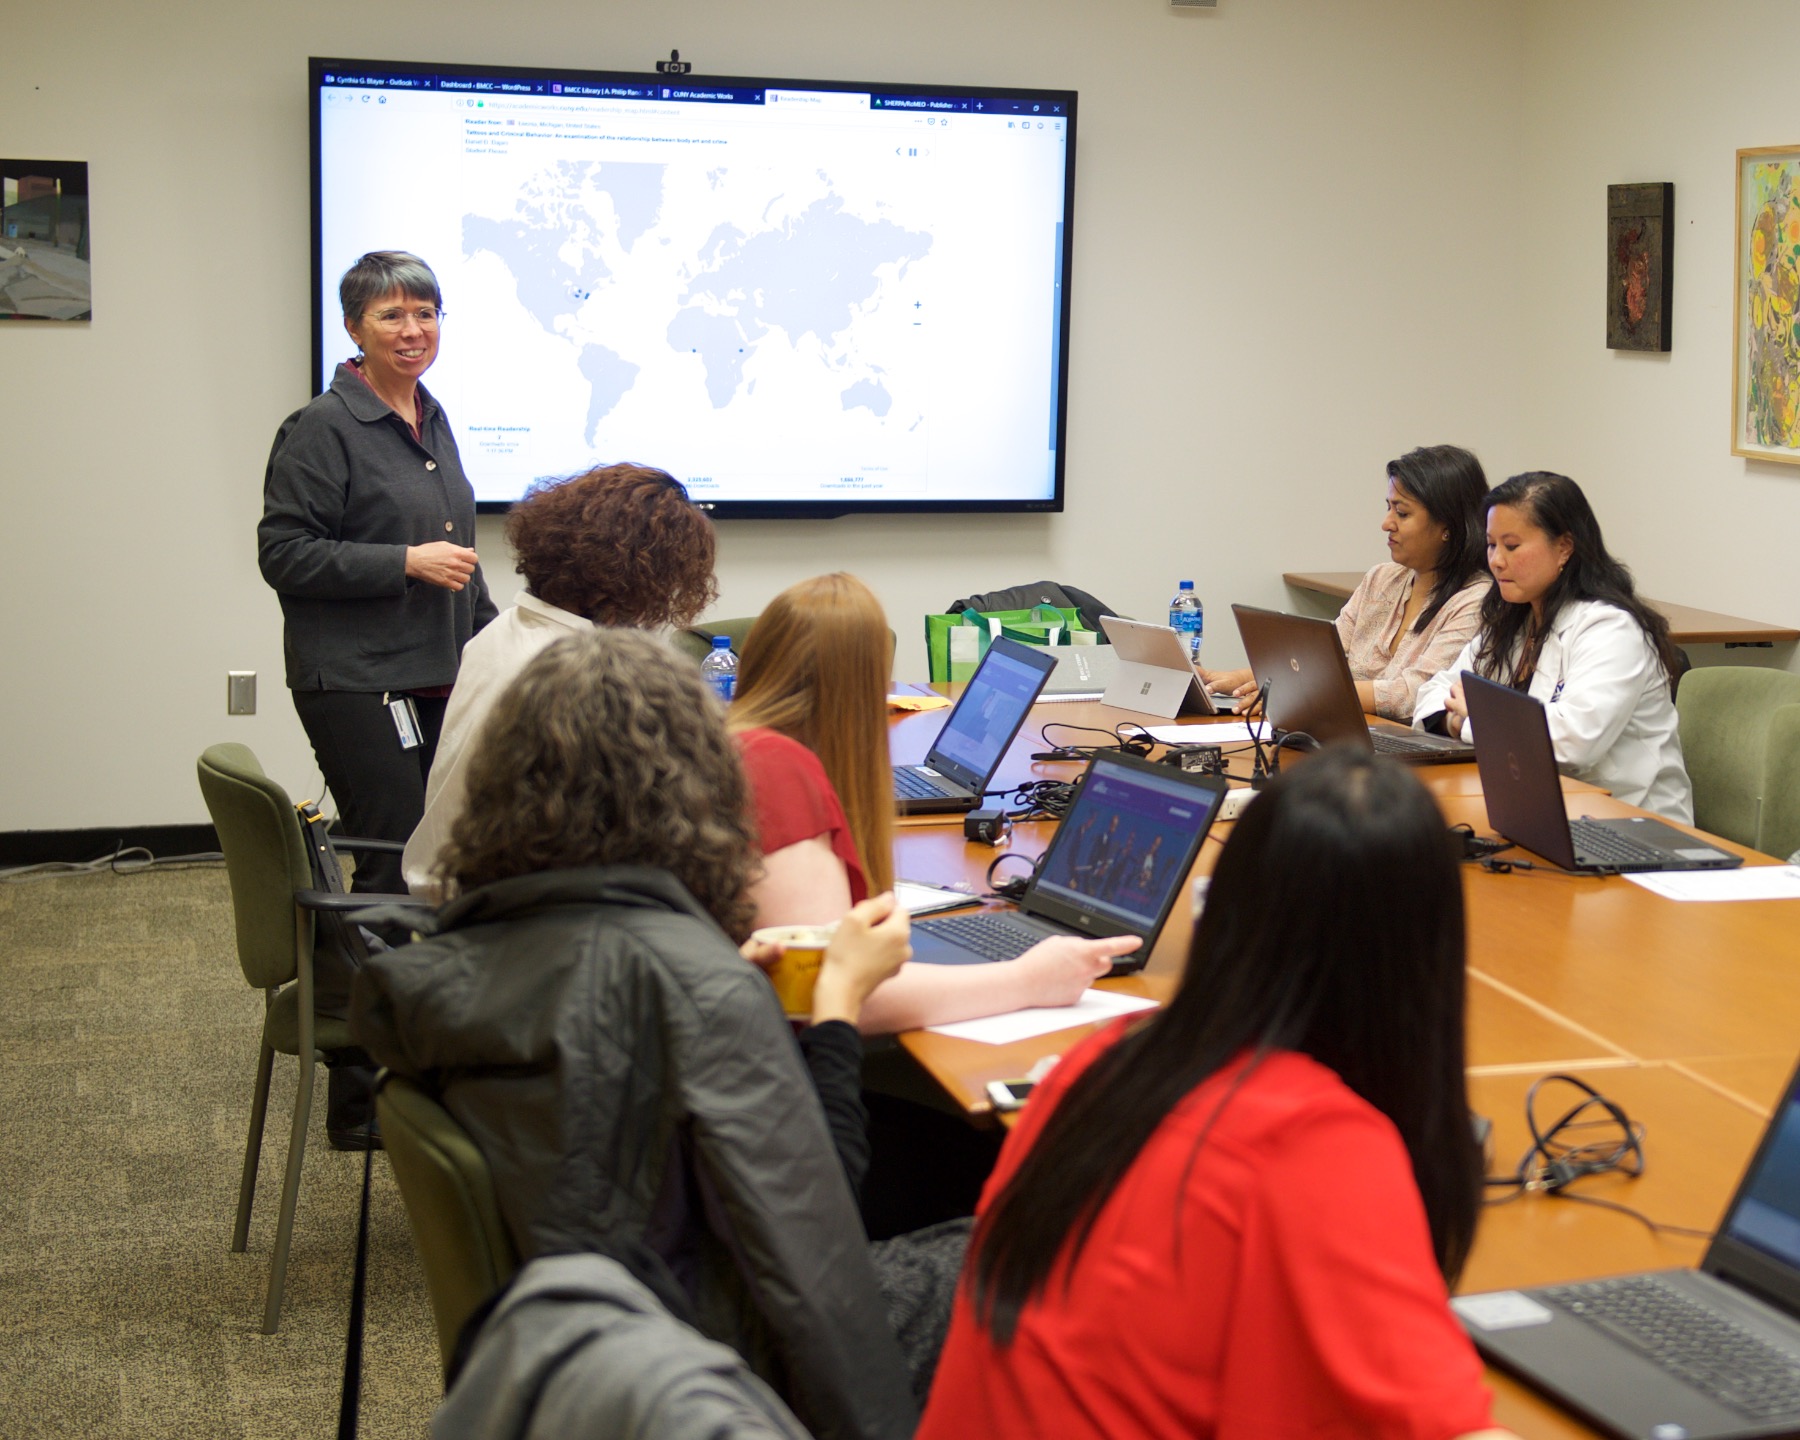 Jean Amaral leads a staff development workshop before March 2020, when the campus switched to distance learning because of the pandemic and state-directed stay-at-home directive.